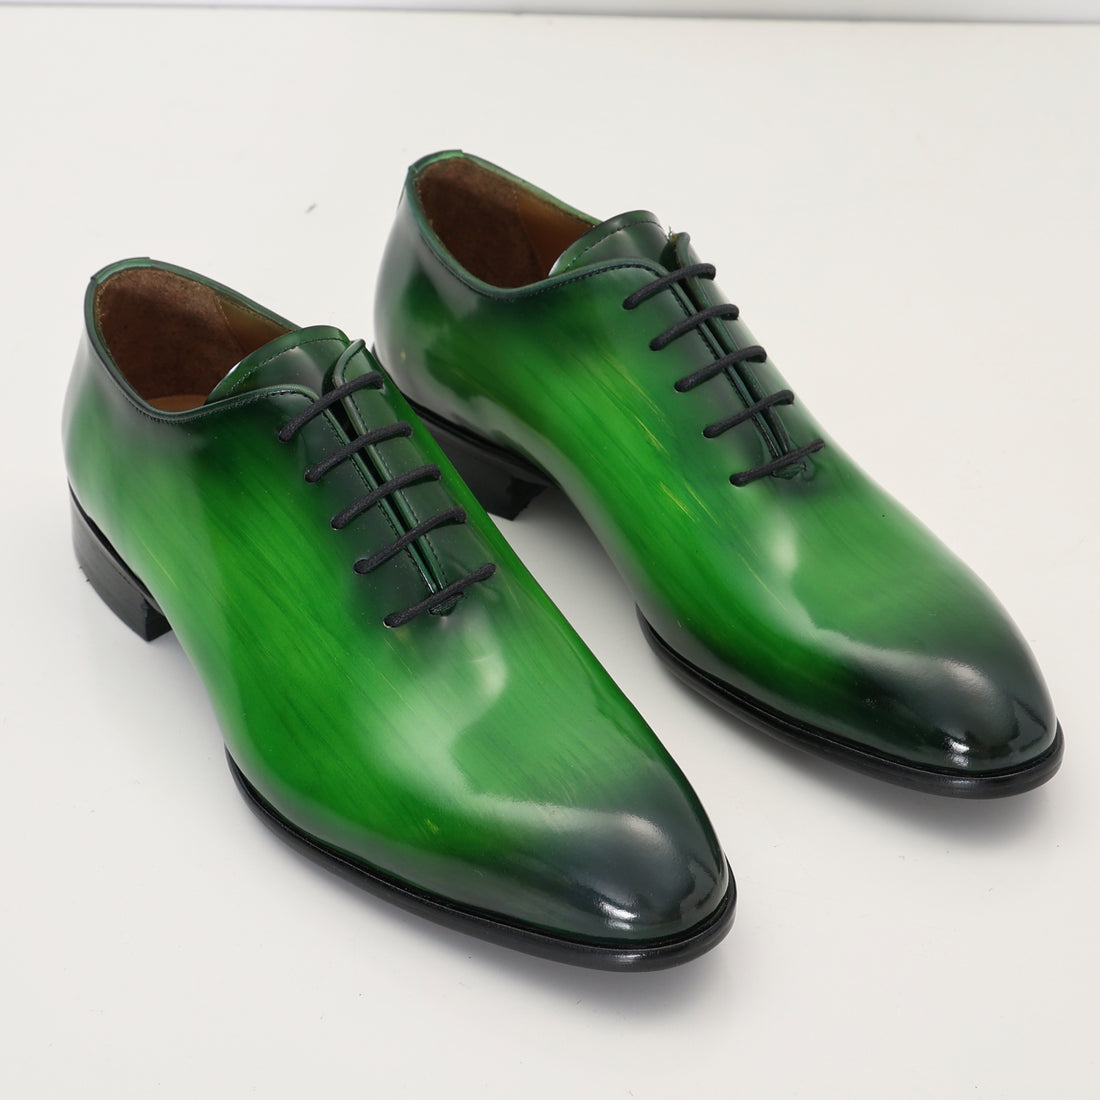 N° AC04 hand paint patina PATENT LEATHER OXFORDS - GREEN